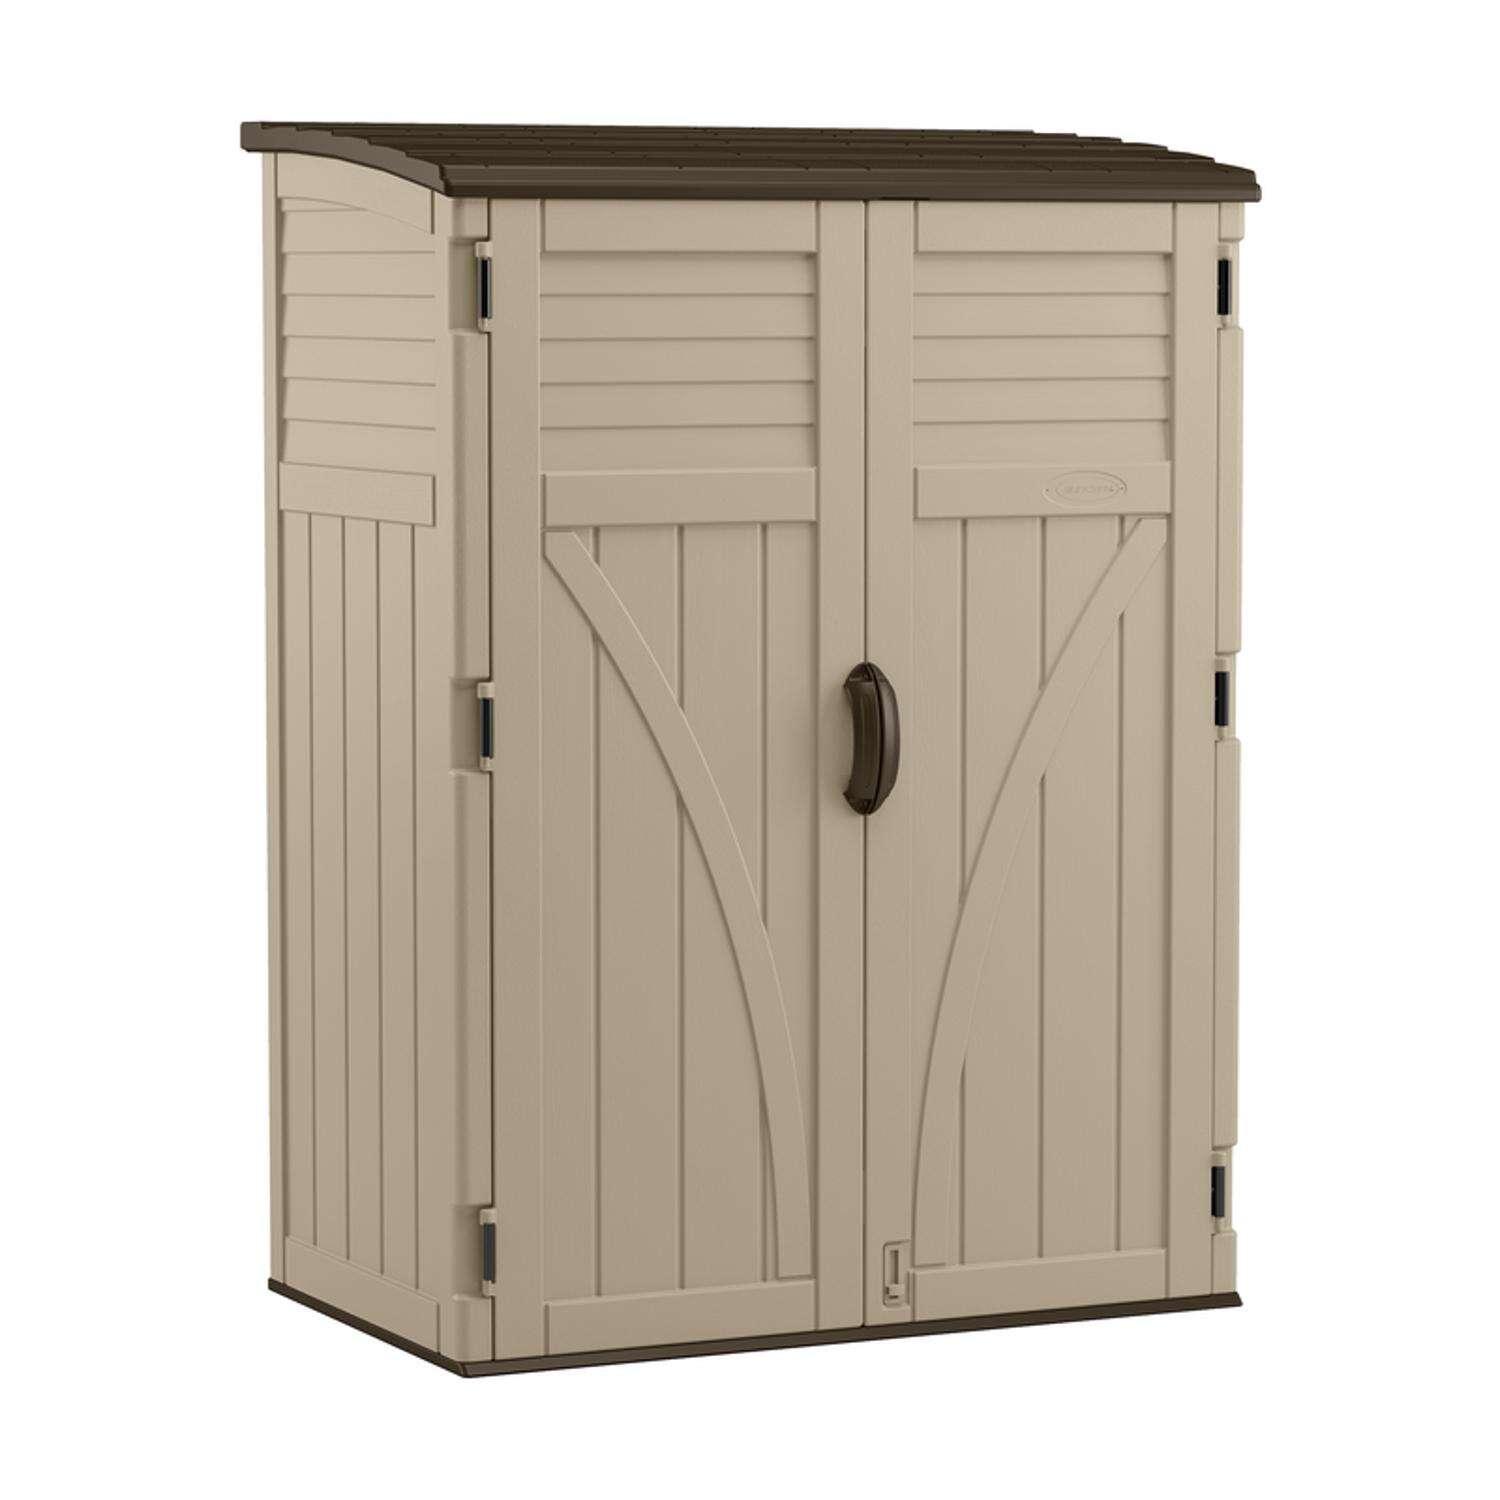 Suncast Plastic Vertical Storage Shed for $349.99 Shipped